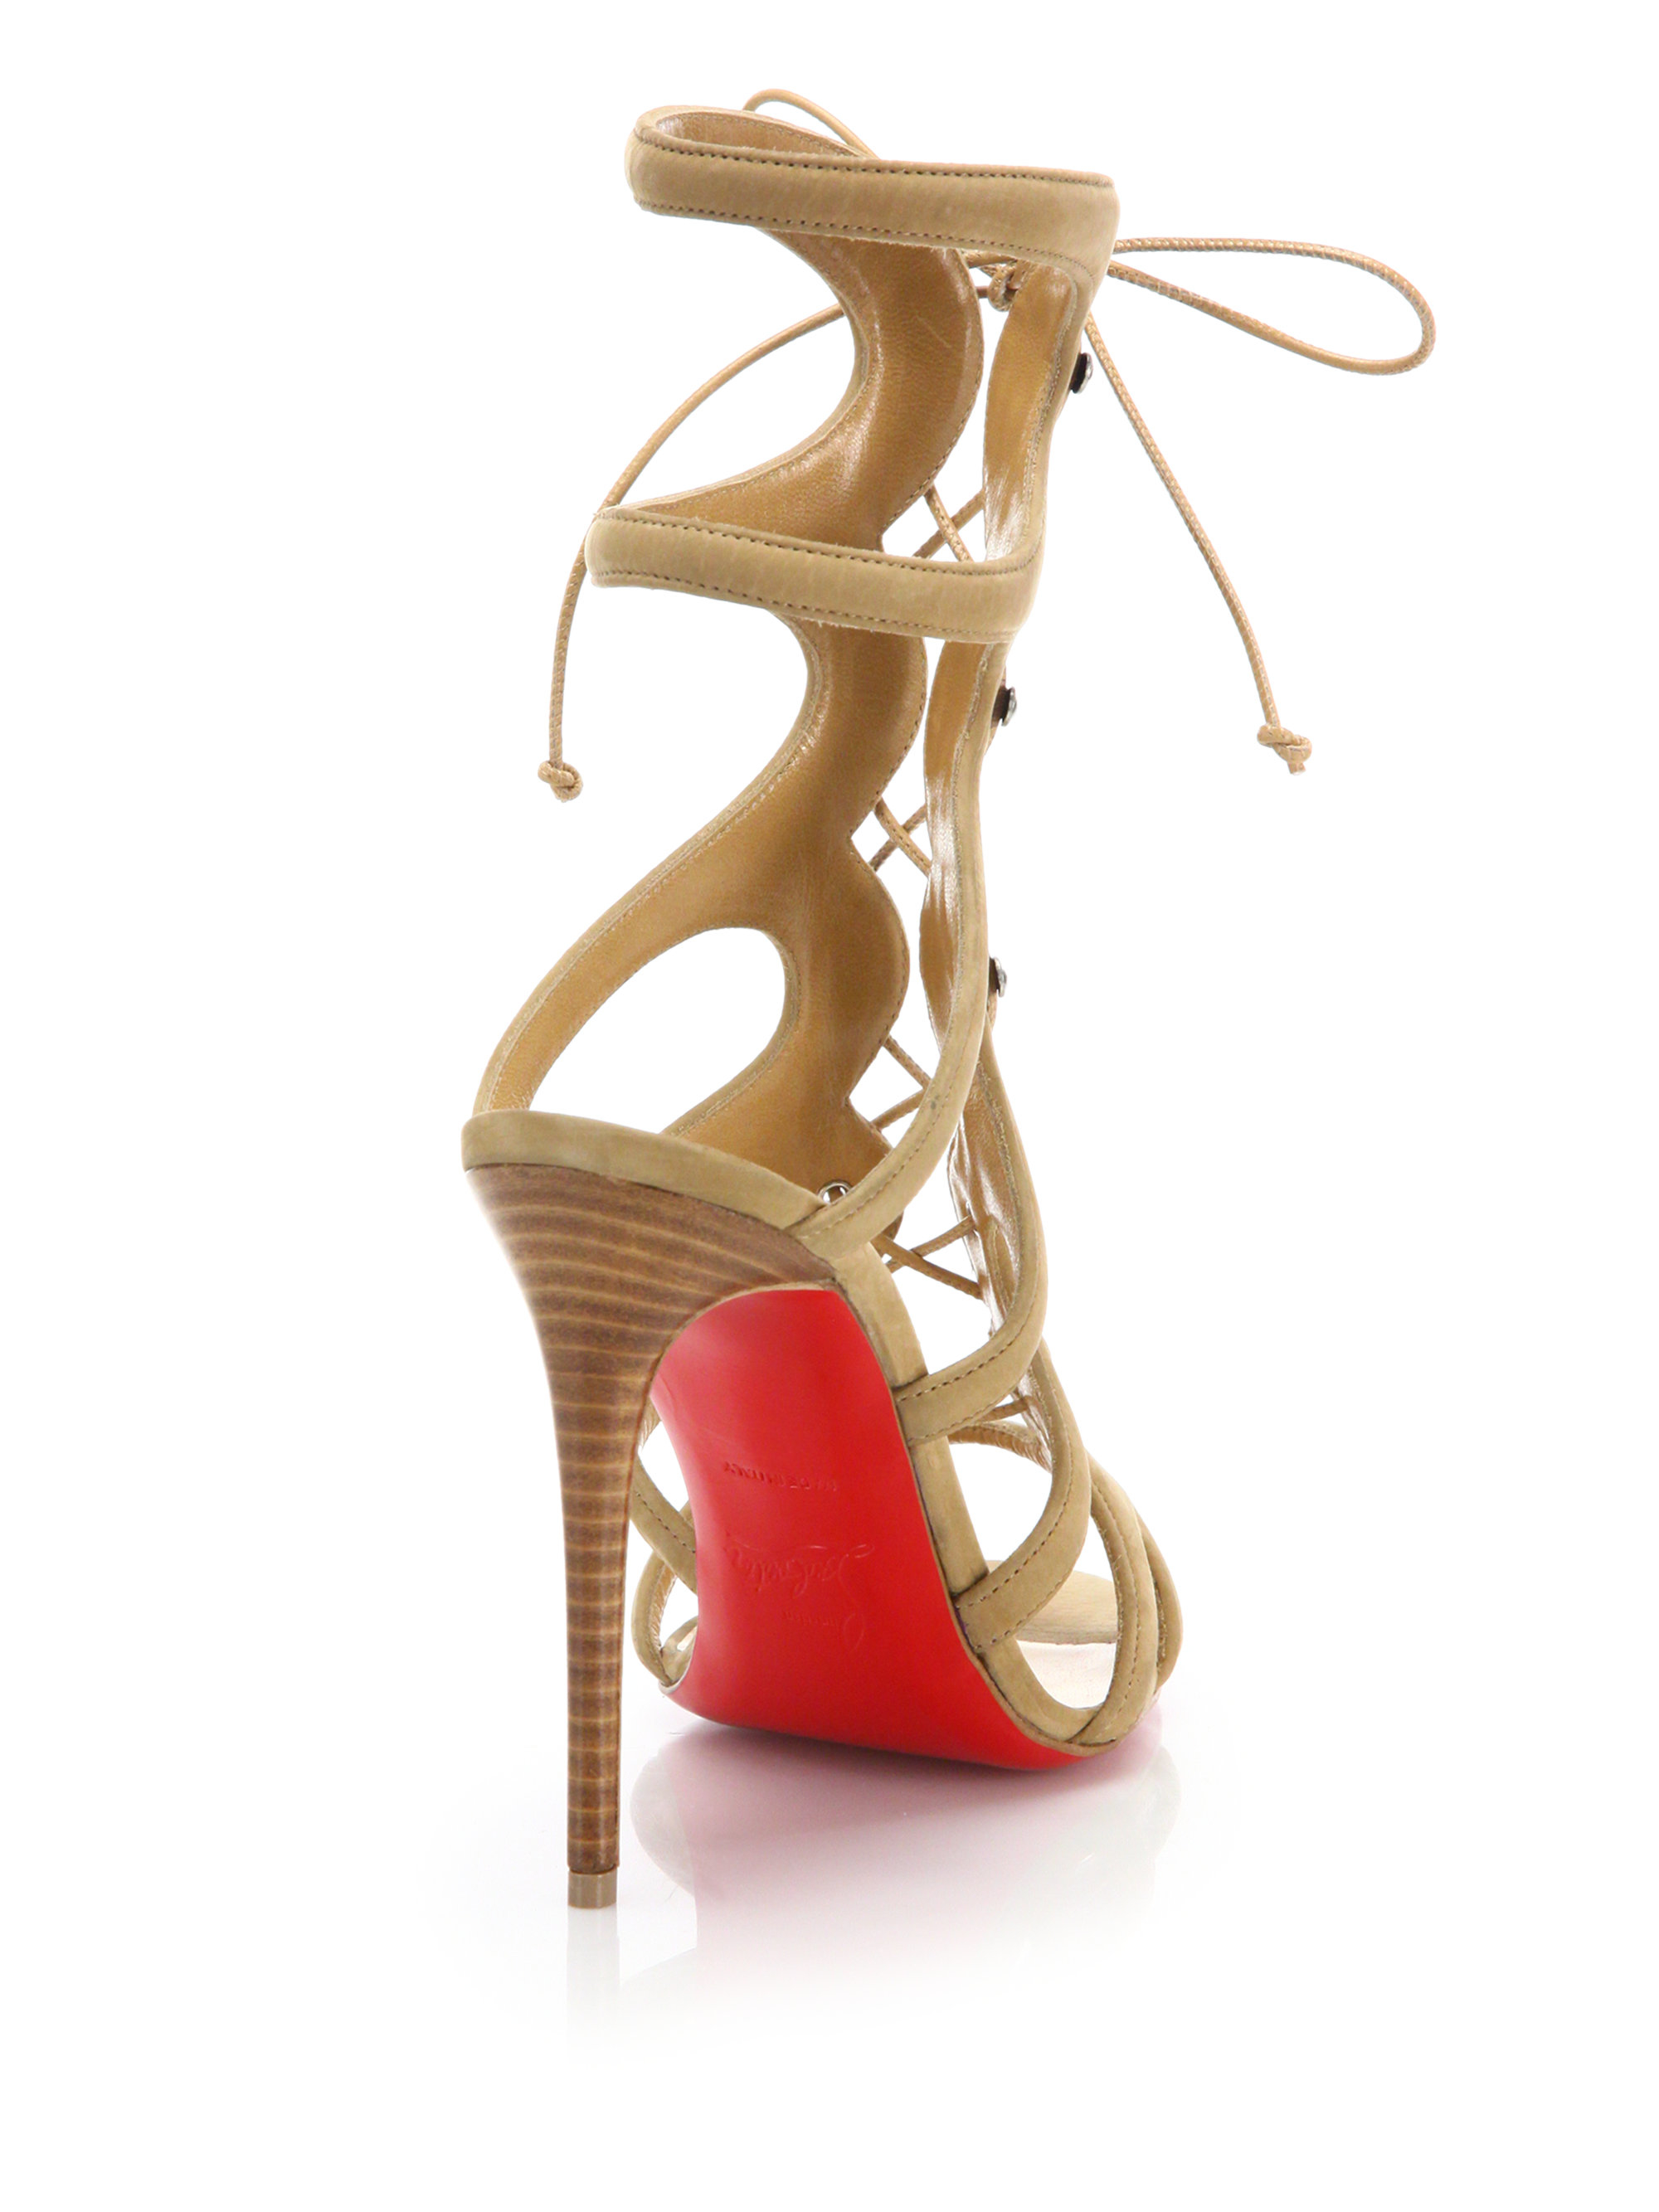 boutin shoes - Christian louboutin Amazoulo Lace-Up Suede Gladiator Sandals in ...